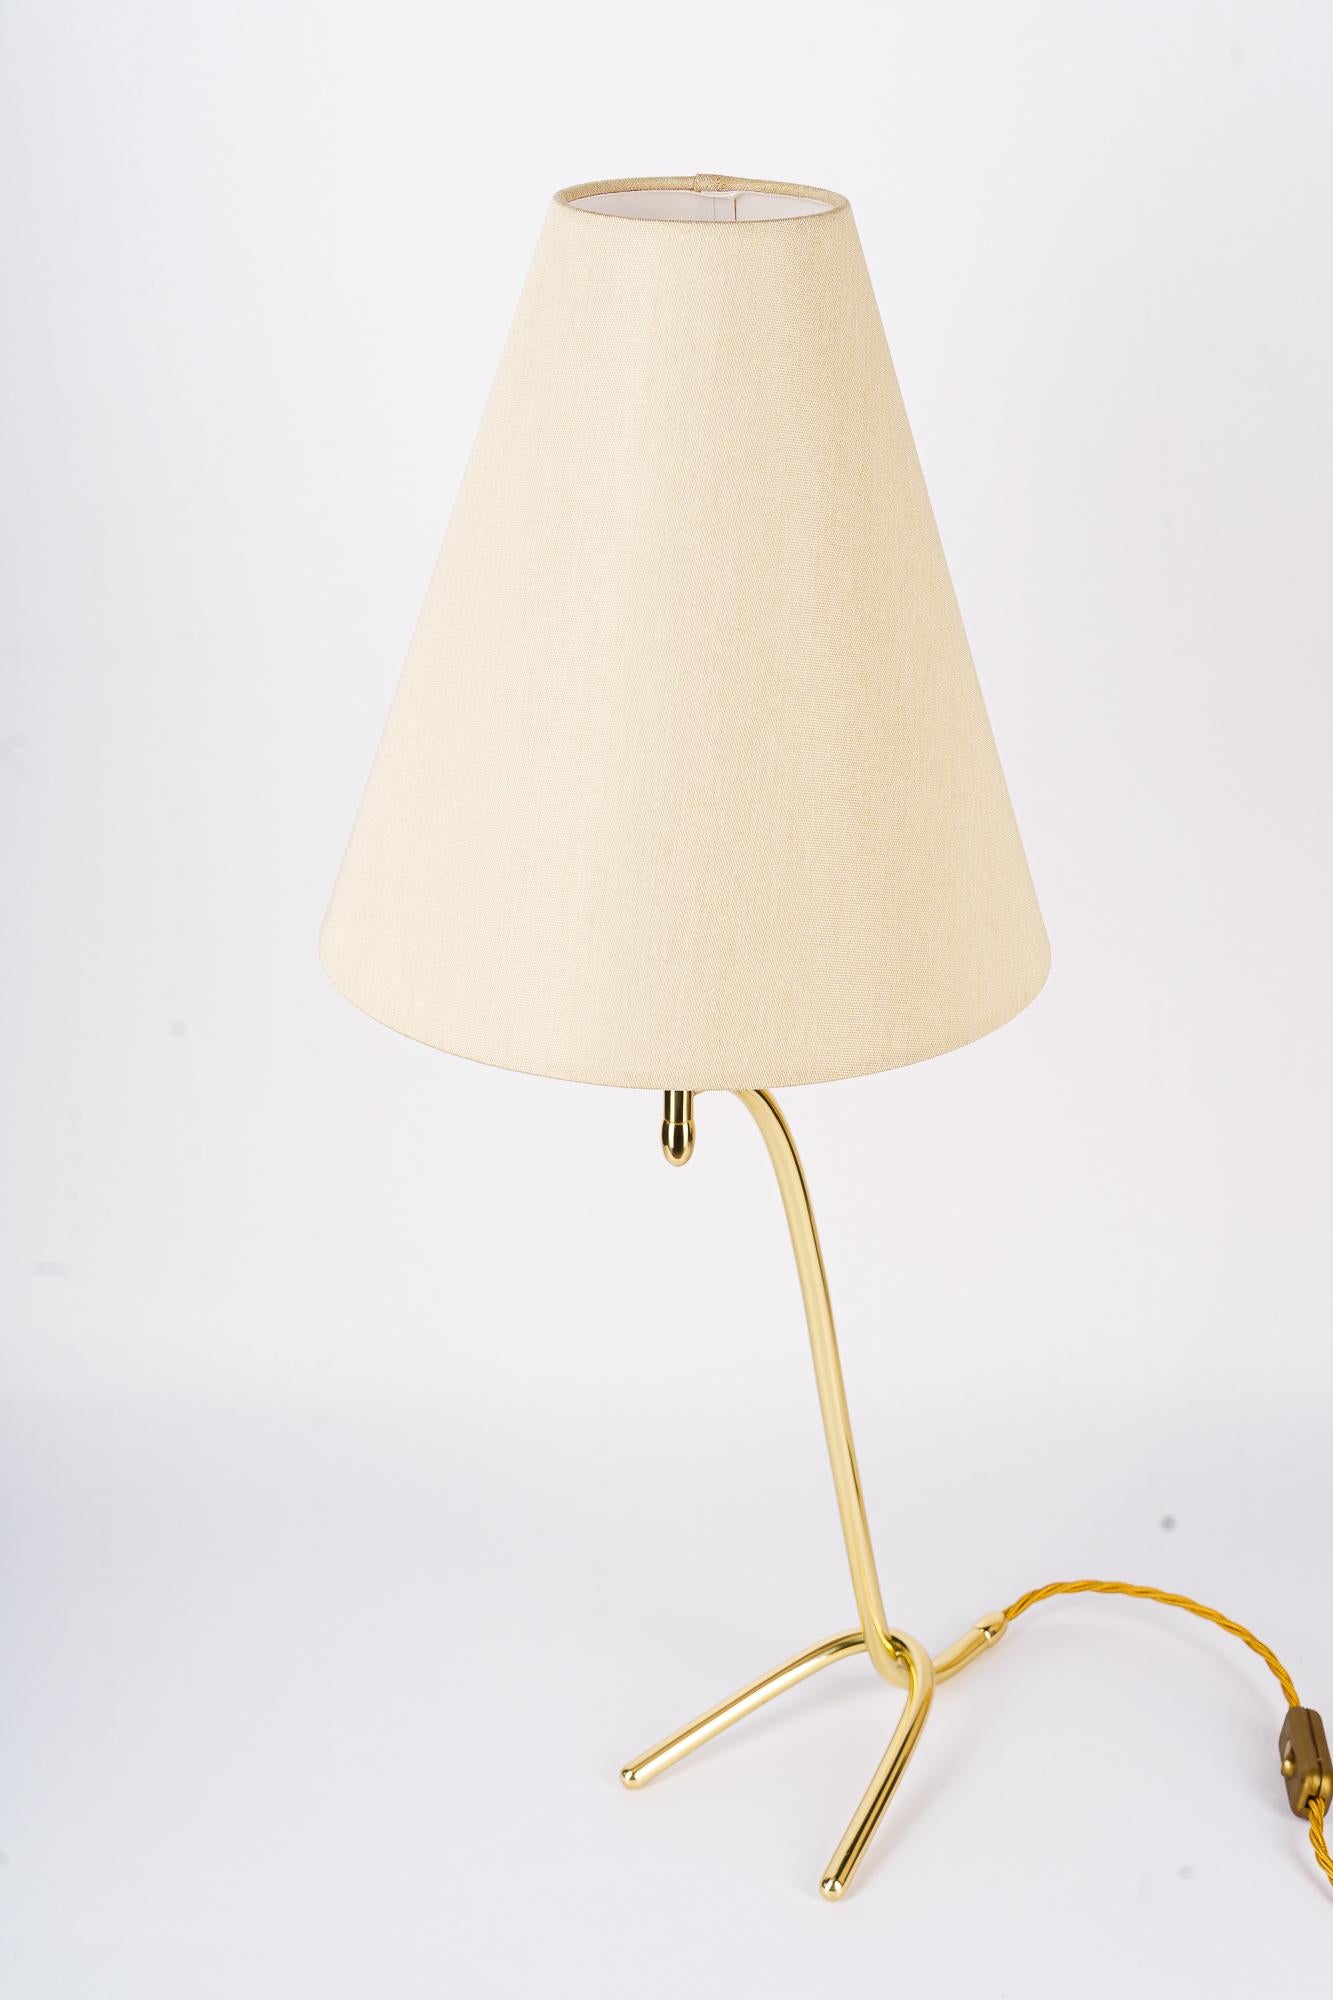 Rupert nikoll table lamp with fabric shade vienna around 1960s
Polished and stove enameled
The fabric shade is replaced ( new )